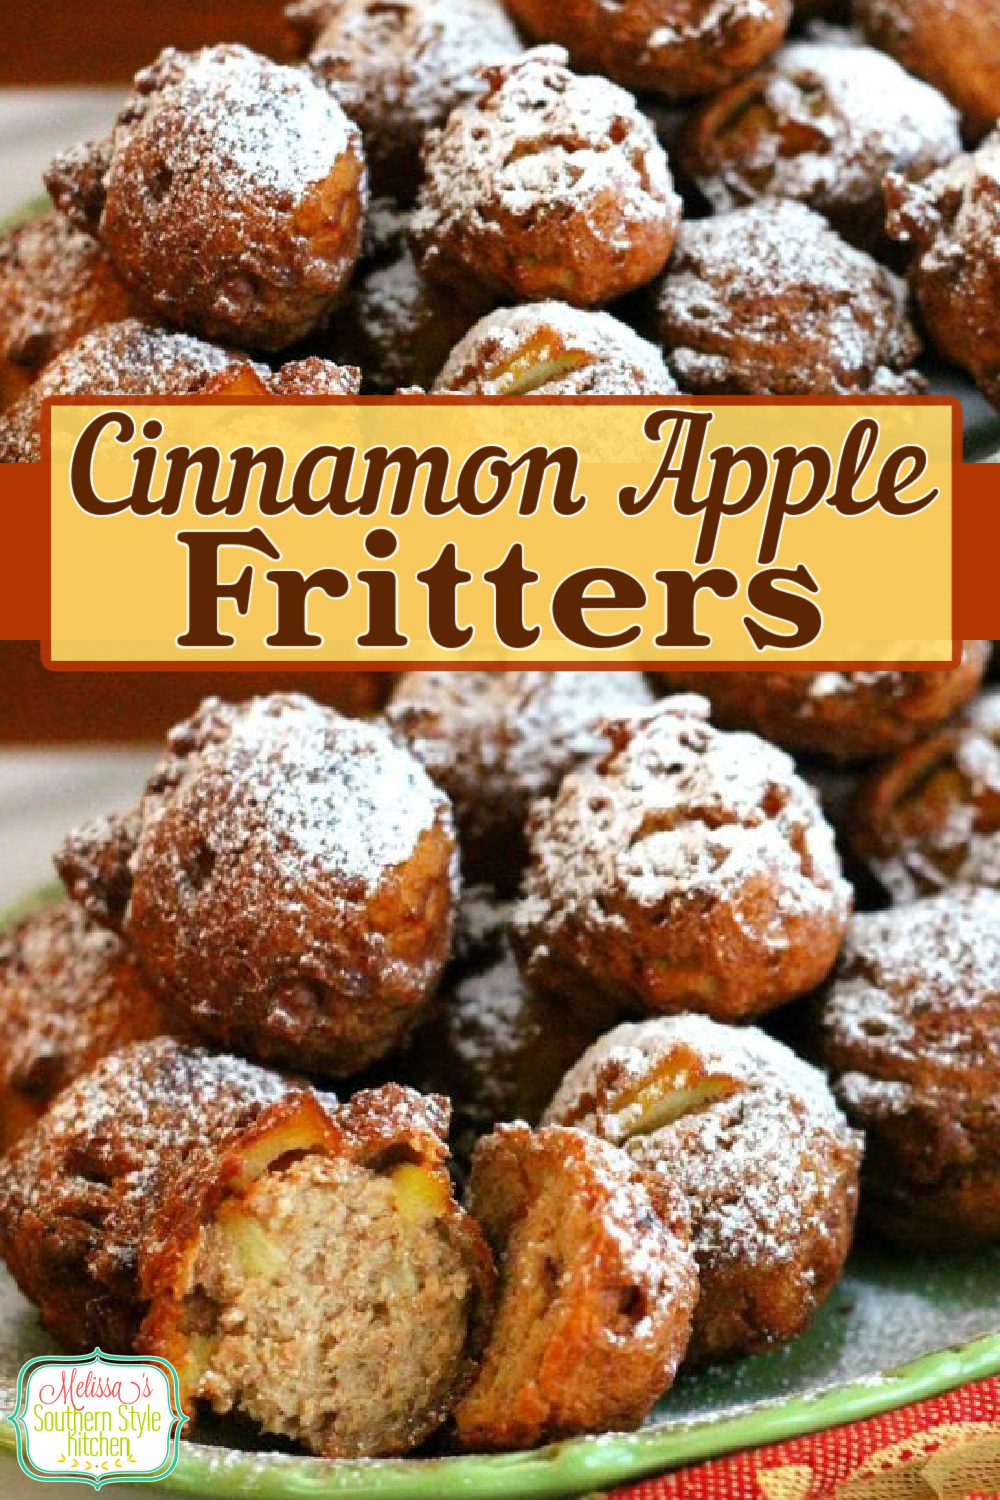 Treat the family to these golden Cinnamon apple Fritters dusted with powdered sugar for breakfast, brunch or dessert #applefritters #appledesserts #apples #fritters @appledonuts #southernrecipes #brunch #desserts #dessertfoodrecipes via @melissasssk